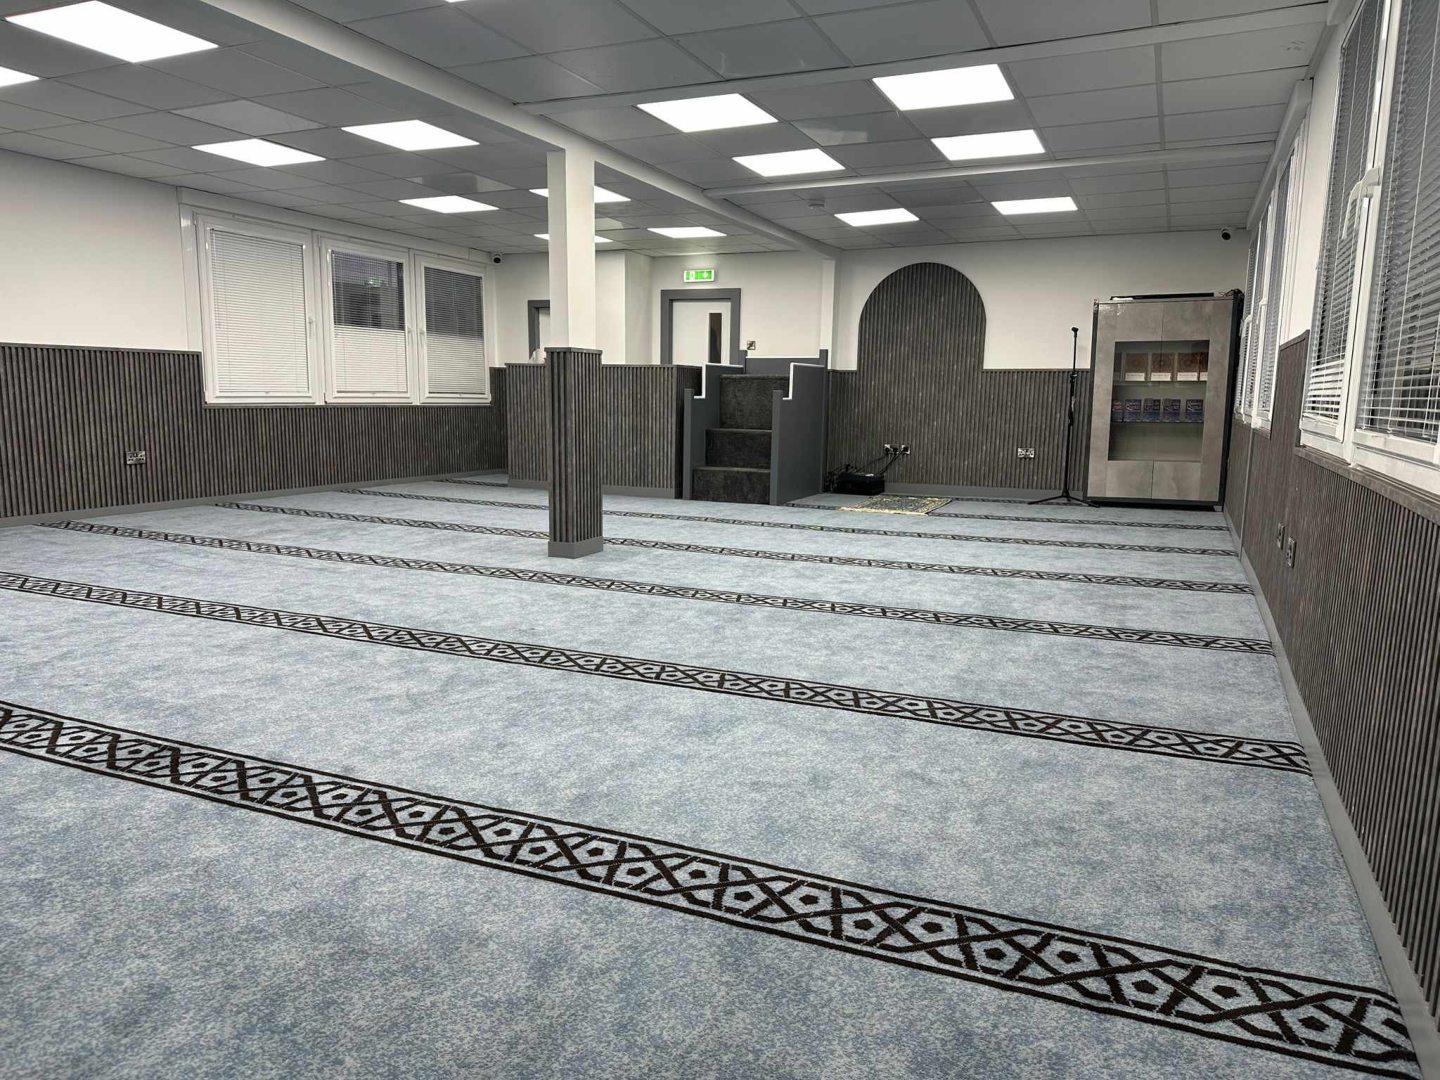 A picture of inside the mosque.